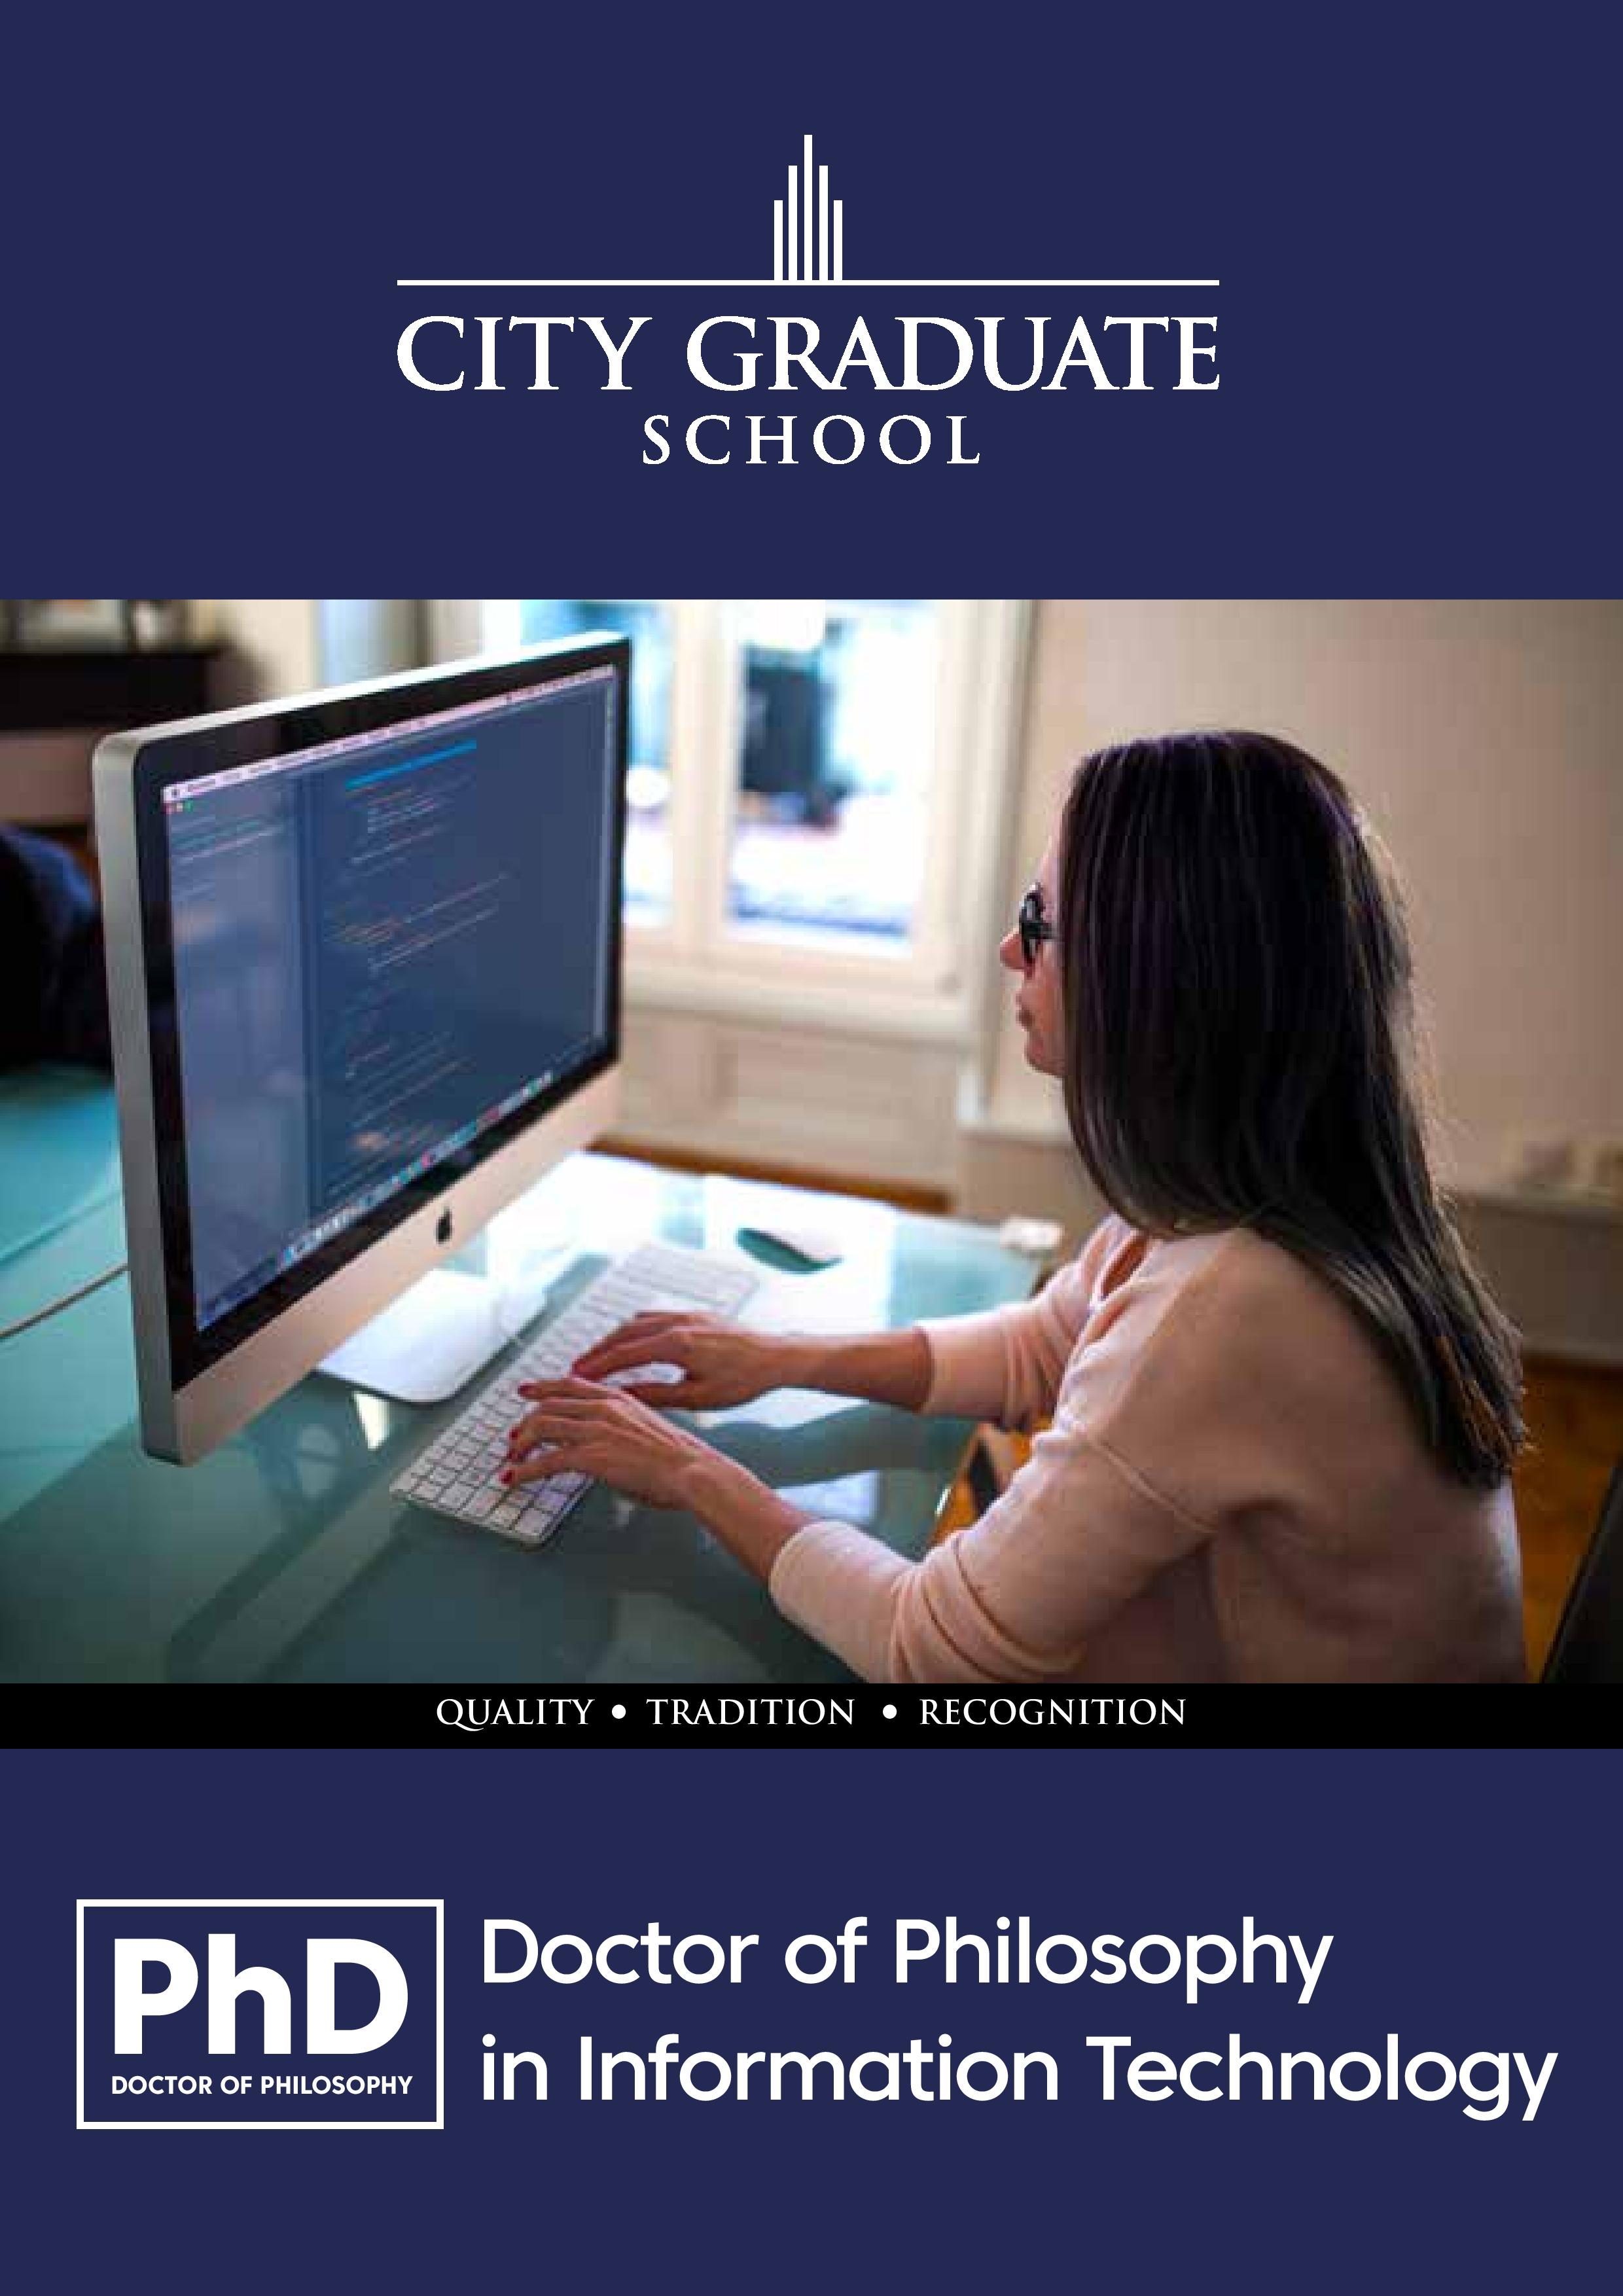 PhD Doc of Philosophy (Information Technology)